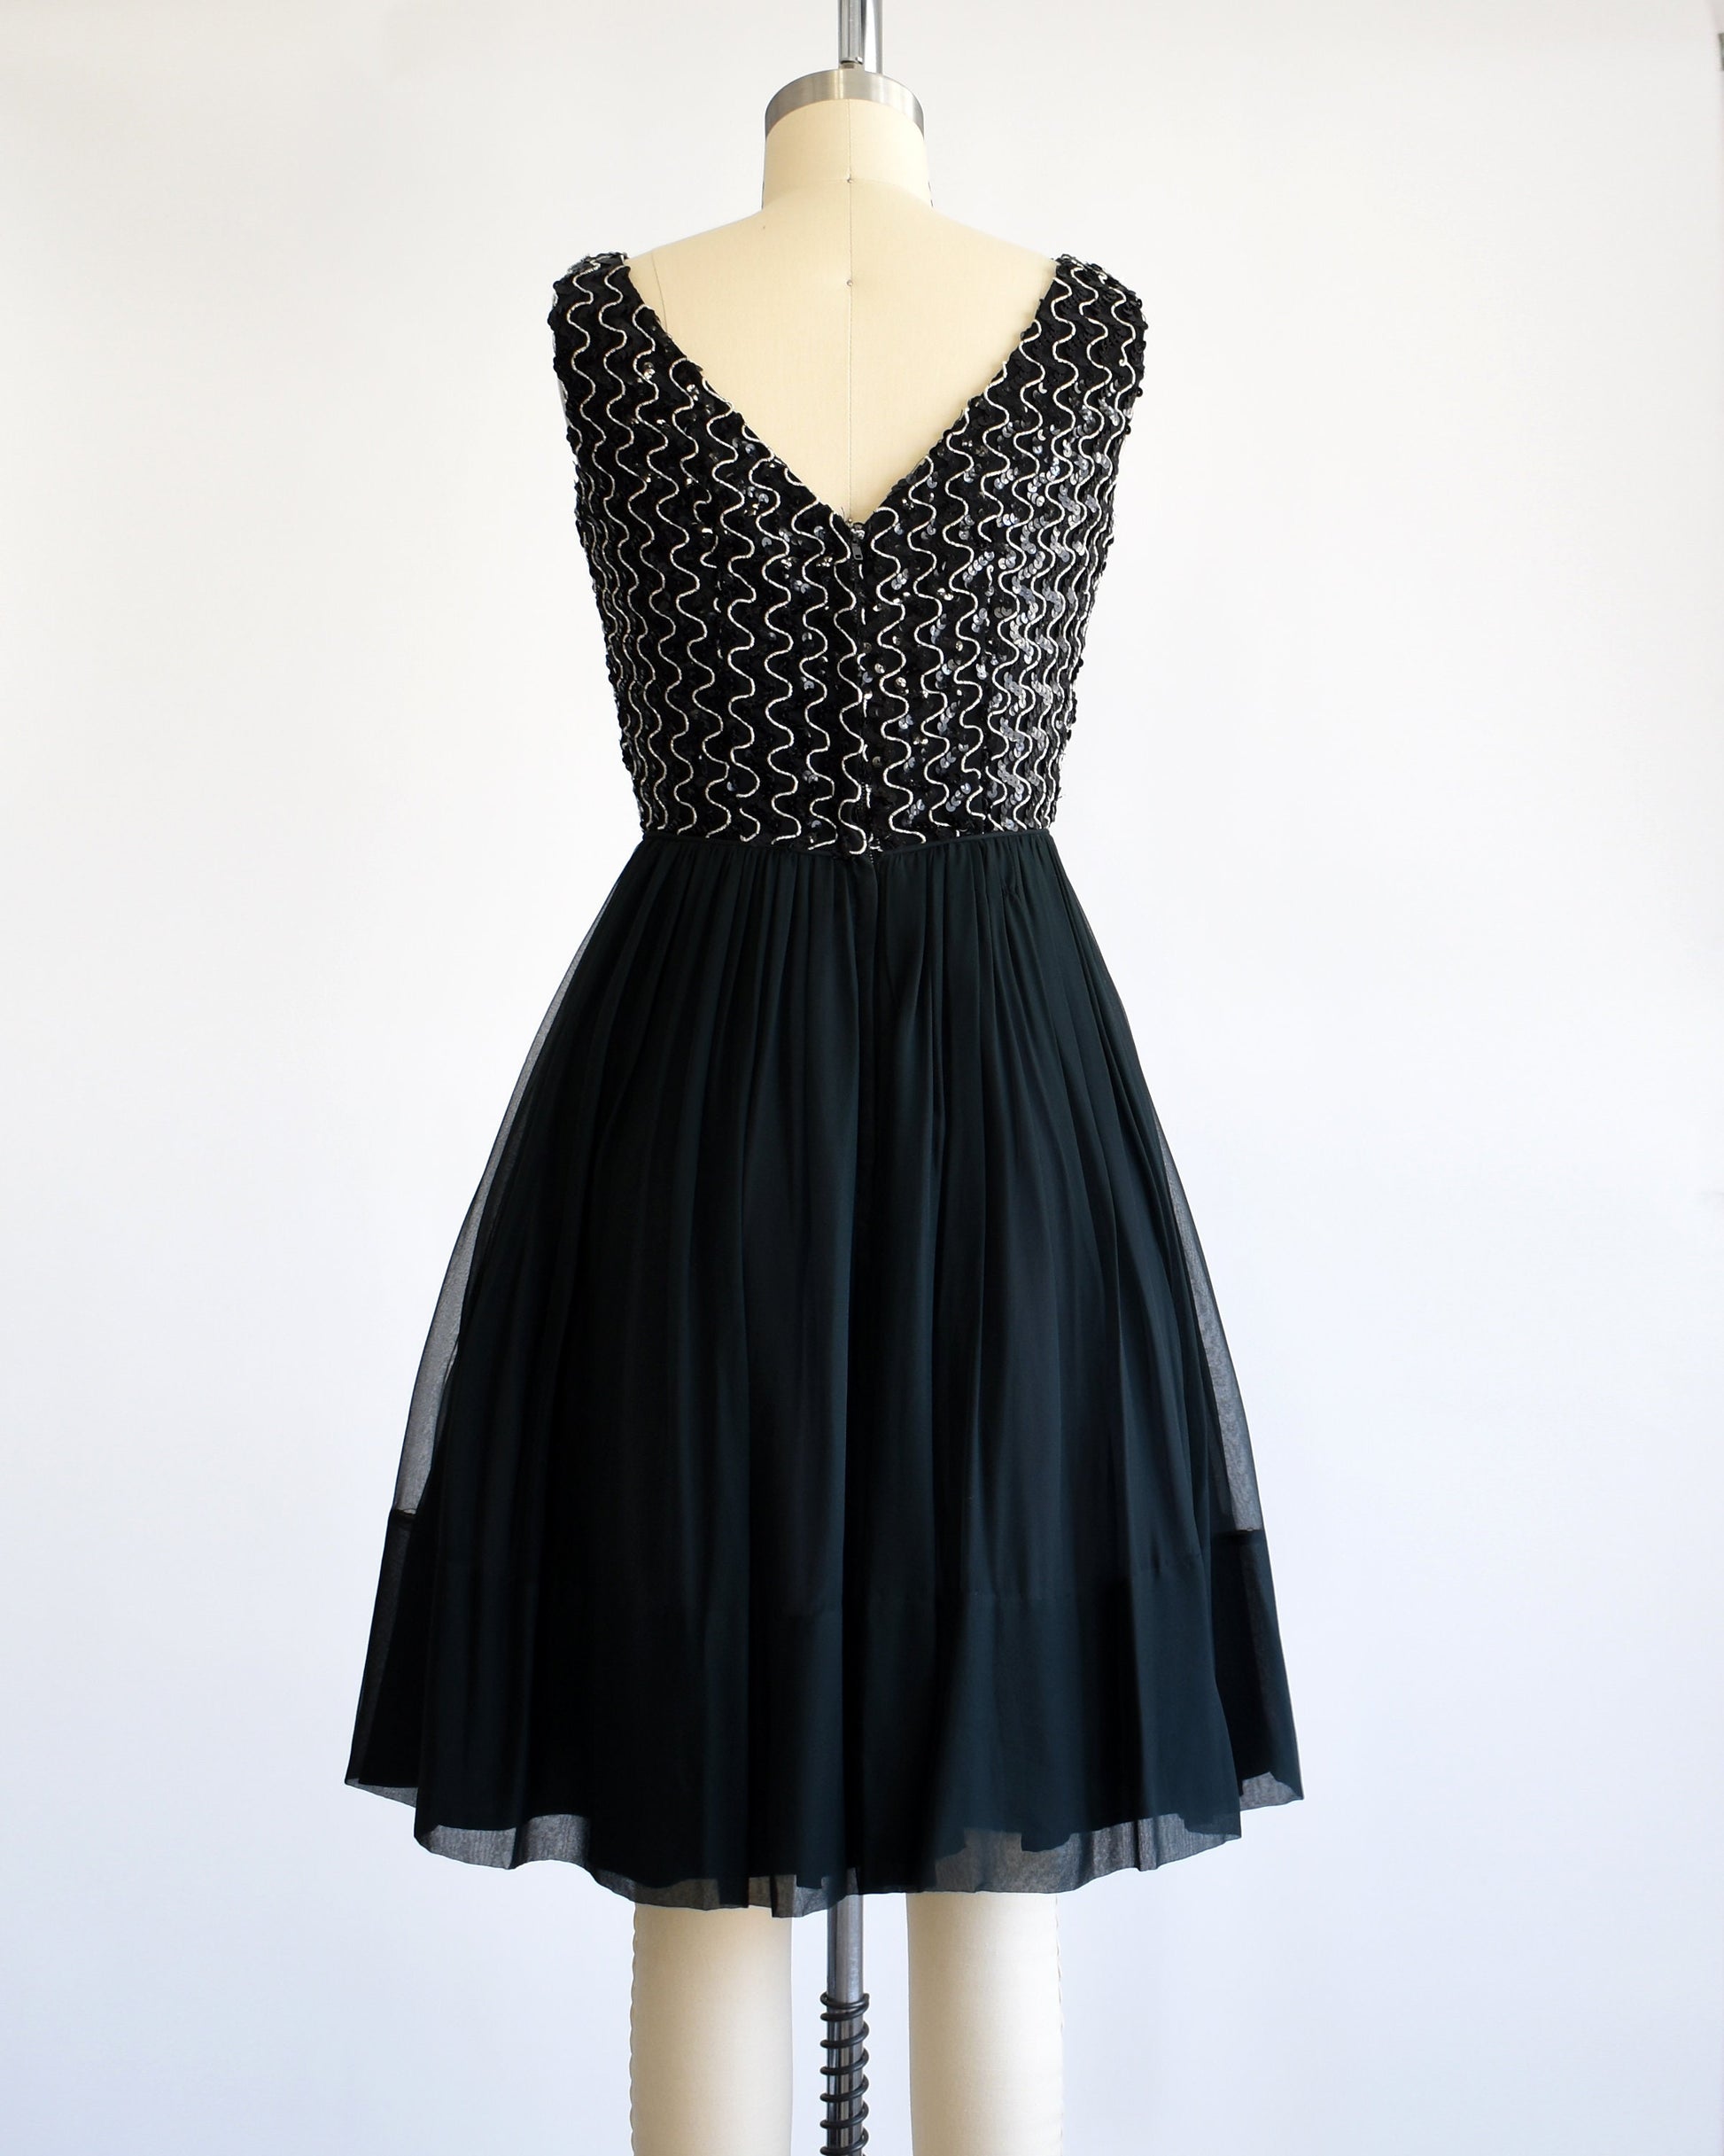 Back view of a vintage 60s dress with a black sequin bodice with silver vertical squiggles. The skirt is a layered with black chiffon on top. The dress is modeled on a dress form.